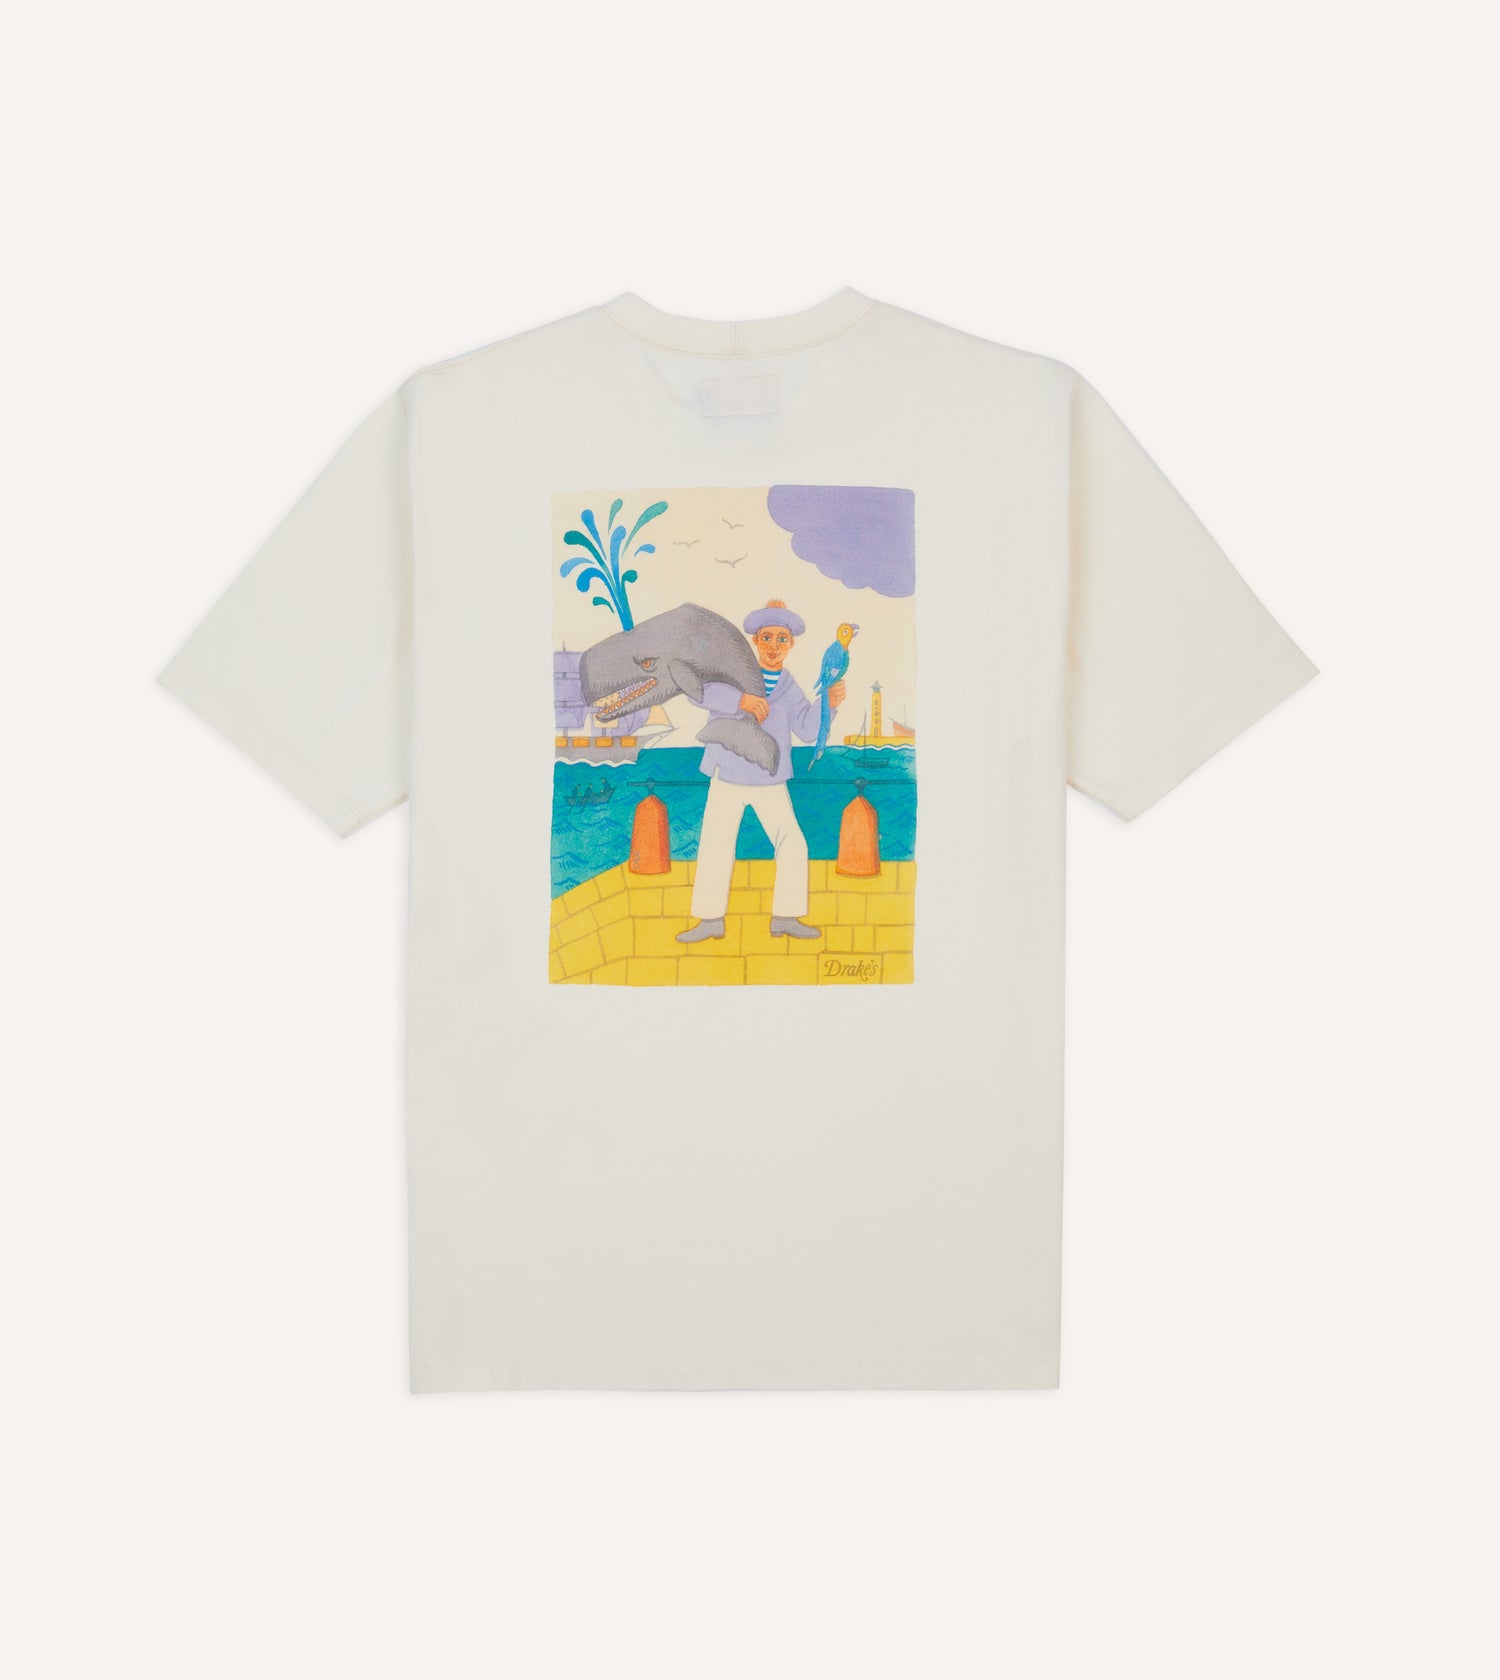 Andreotti & Baribeaud for Drake's 'The Sailor' T-Shirt